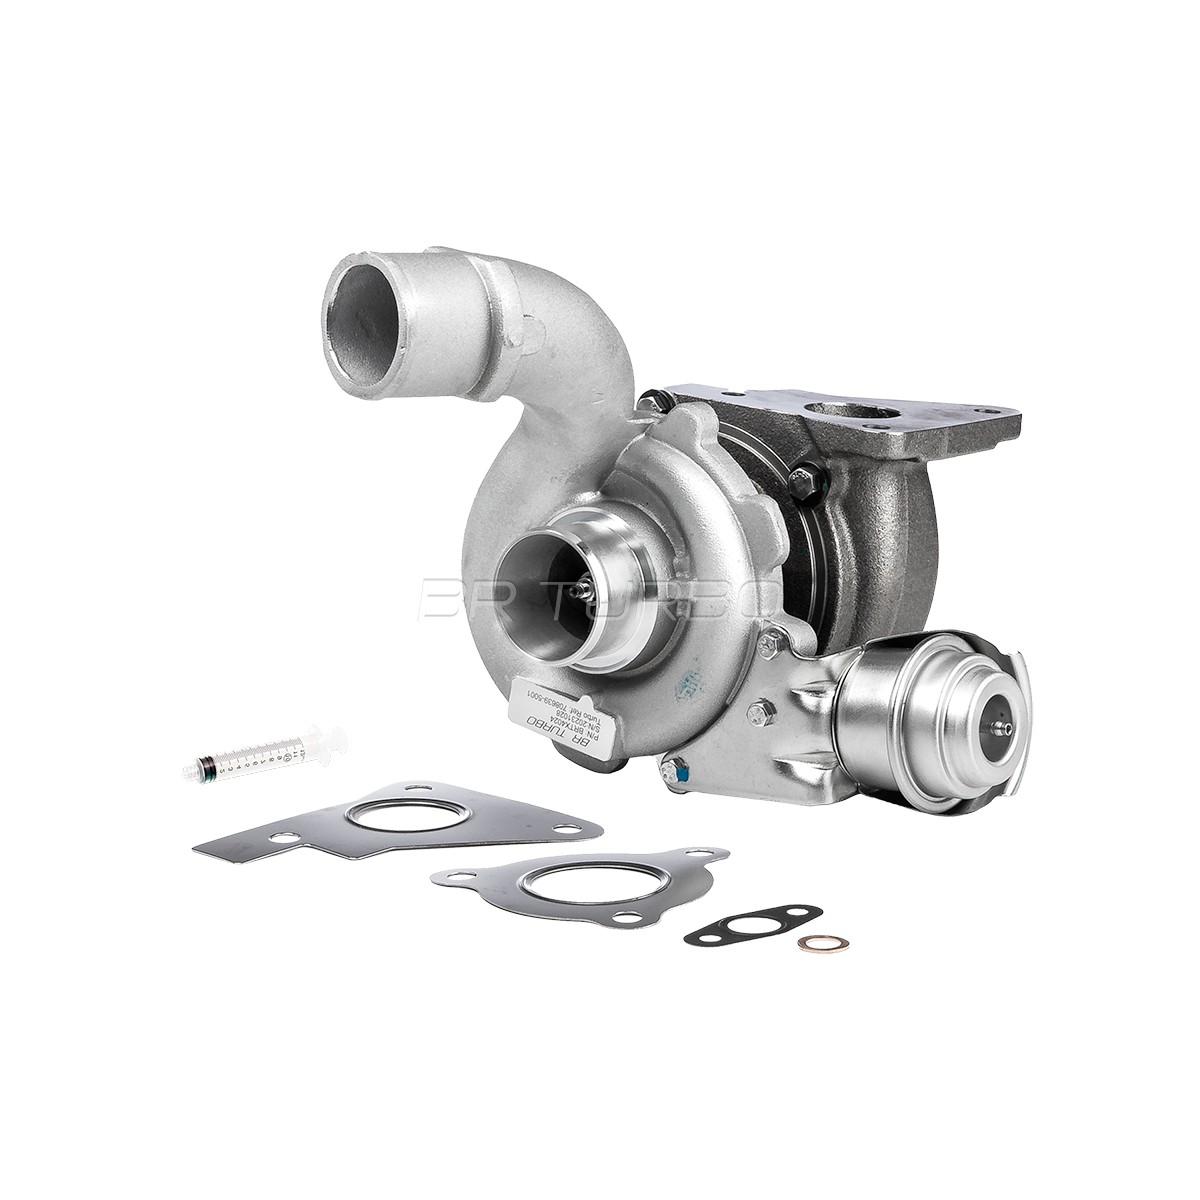 BRTX4024 Turbocharger NEW BR TURBO TURBOCHARGER WITH GASKET KIT BR Turbo BRTX4024 review and test